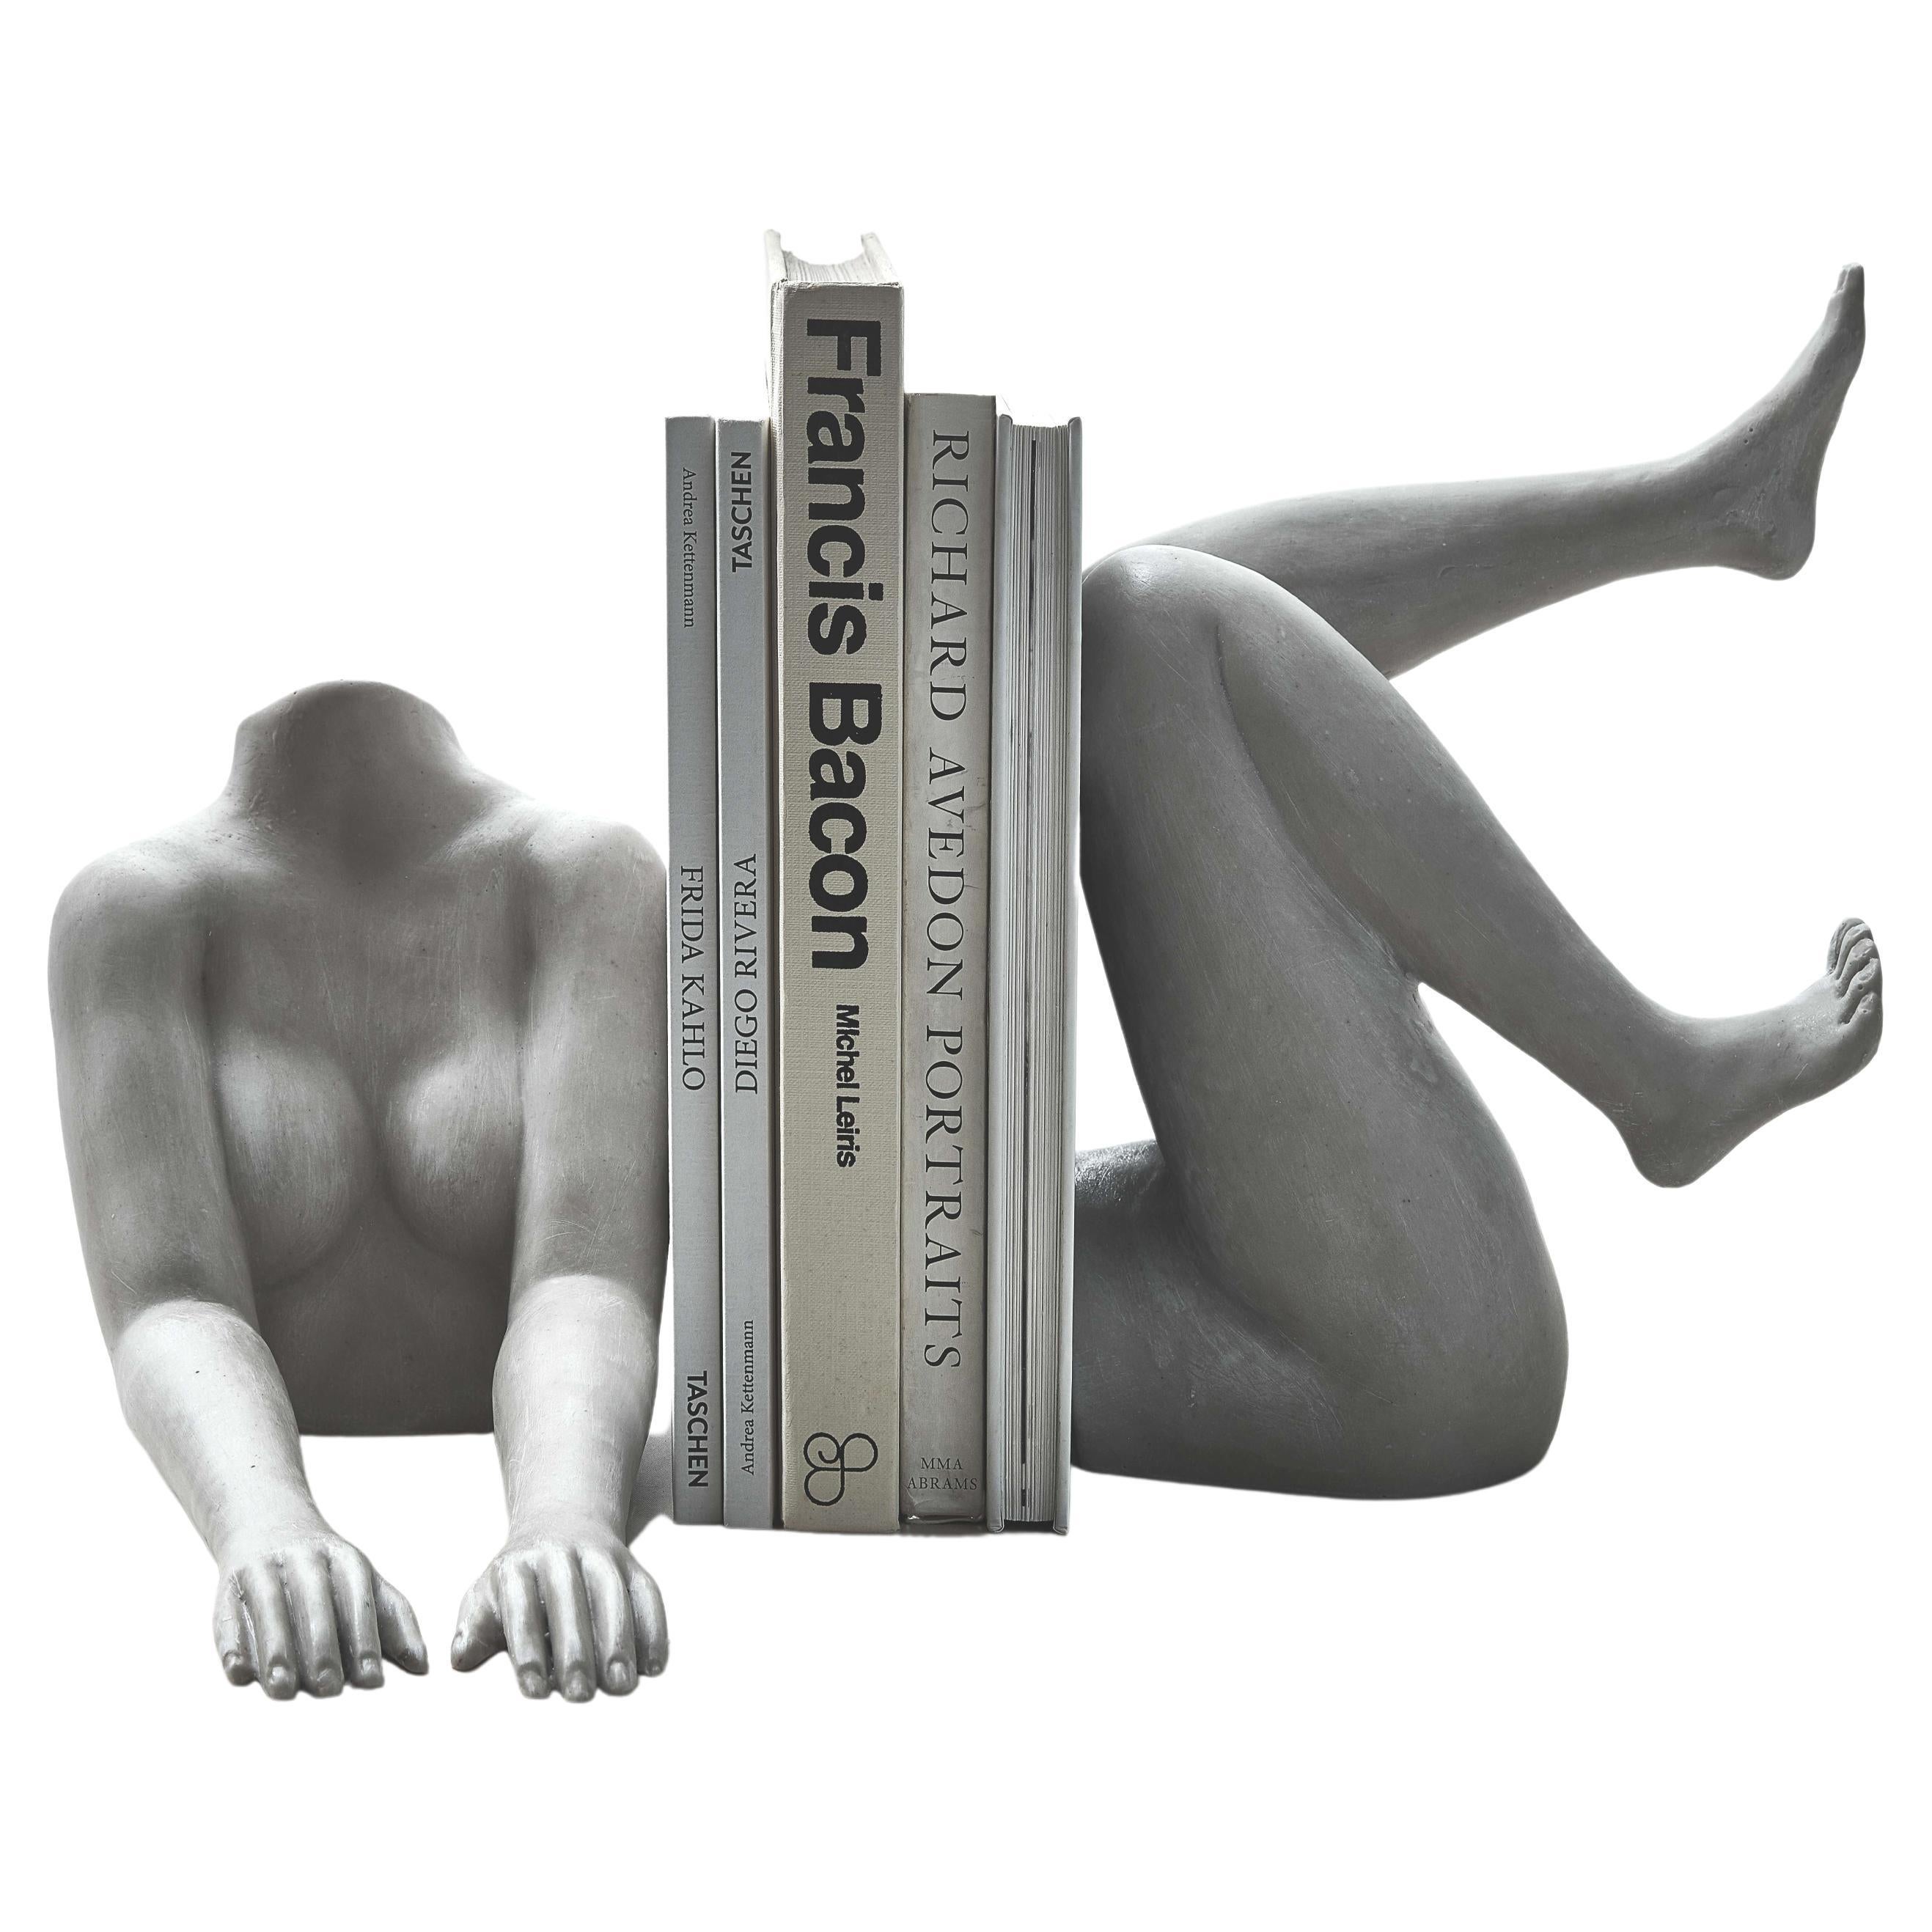 Il Corpo S Sculptural Bookends Portraying Female Body Hand Crafted Resin Stone